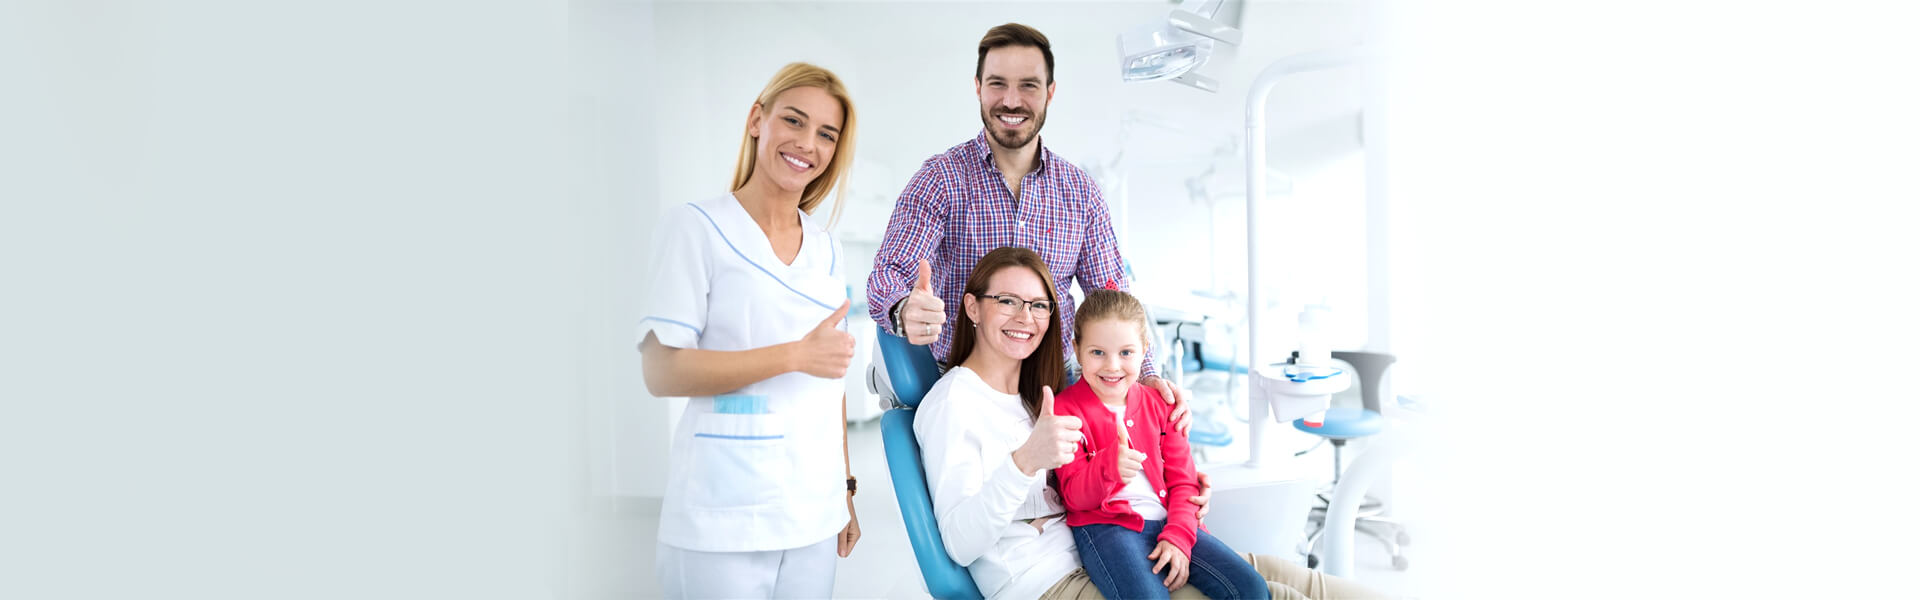 Take Advantage of the Amazing Benefits of Family Dentistry for Your Household